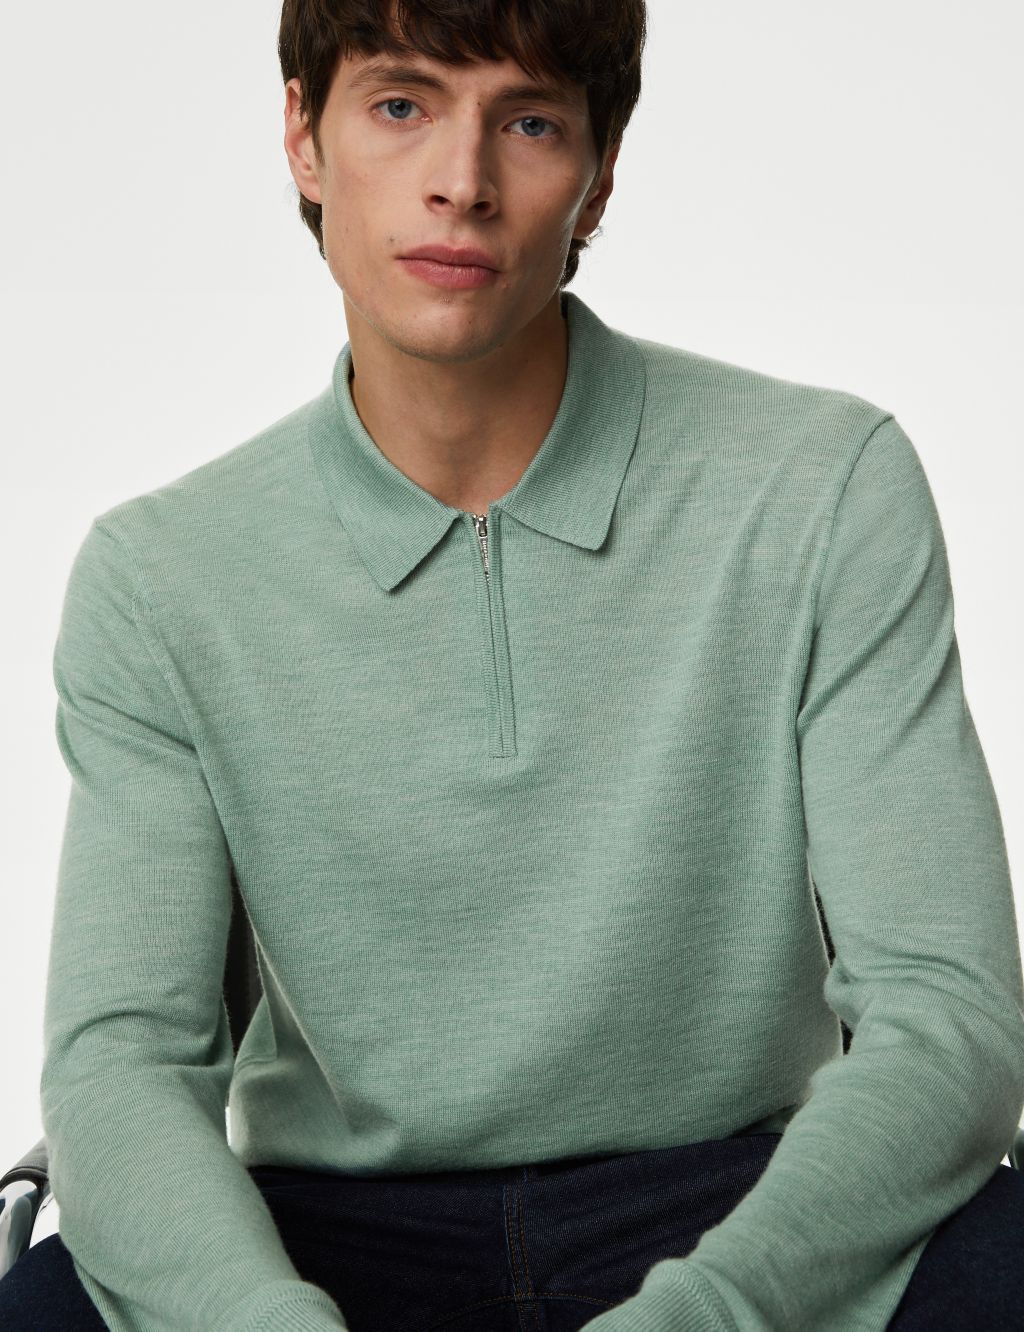 Pure Extra Fine Merino Wool Knitted Polo image 1